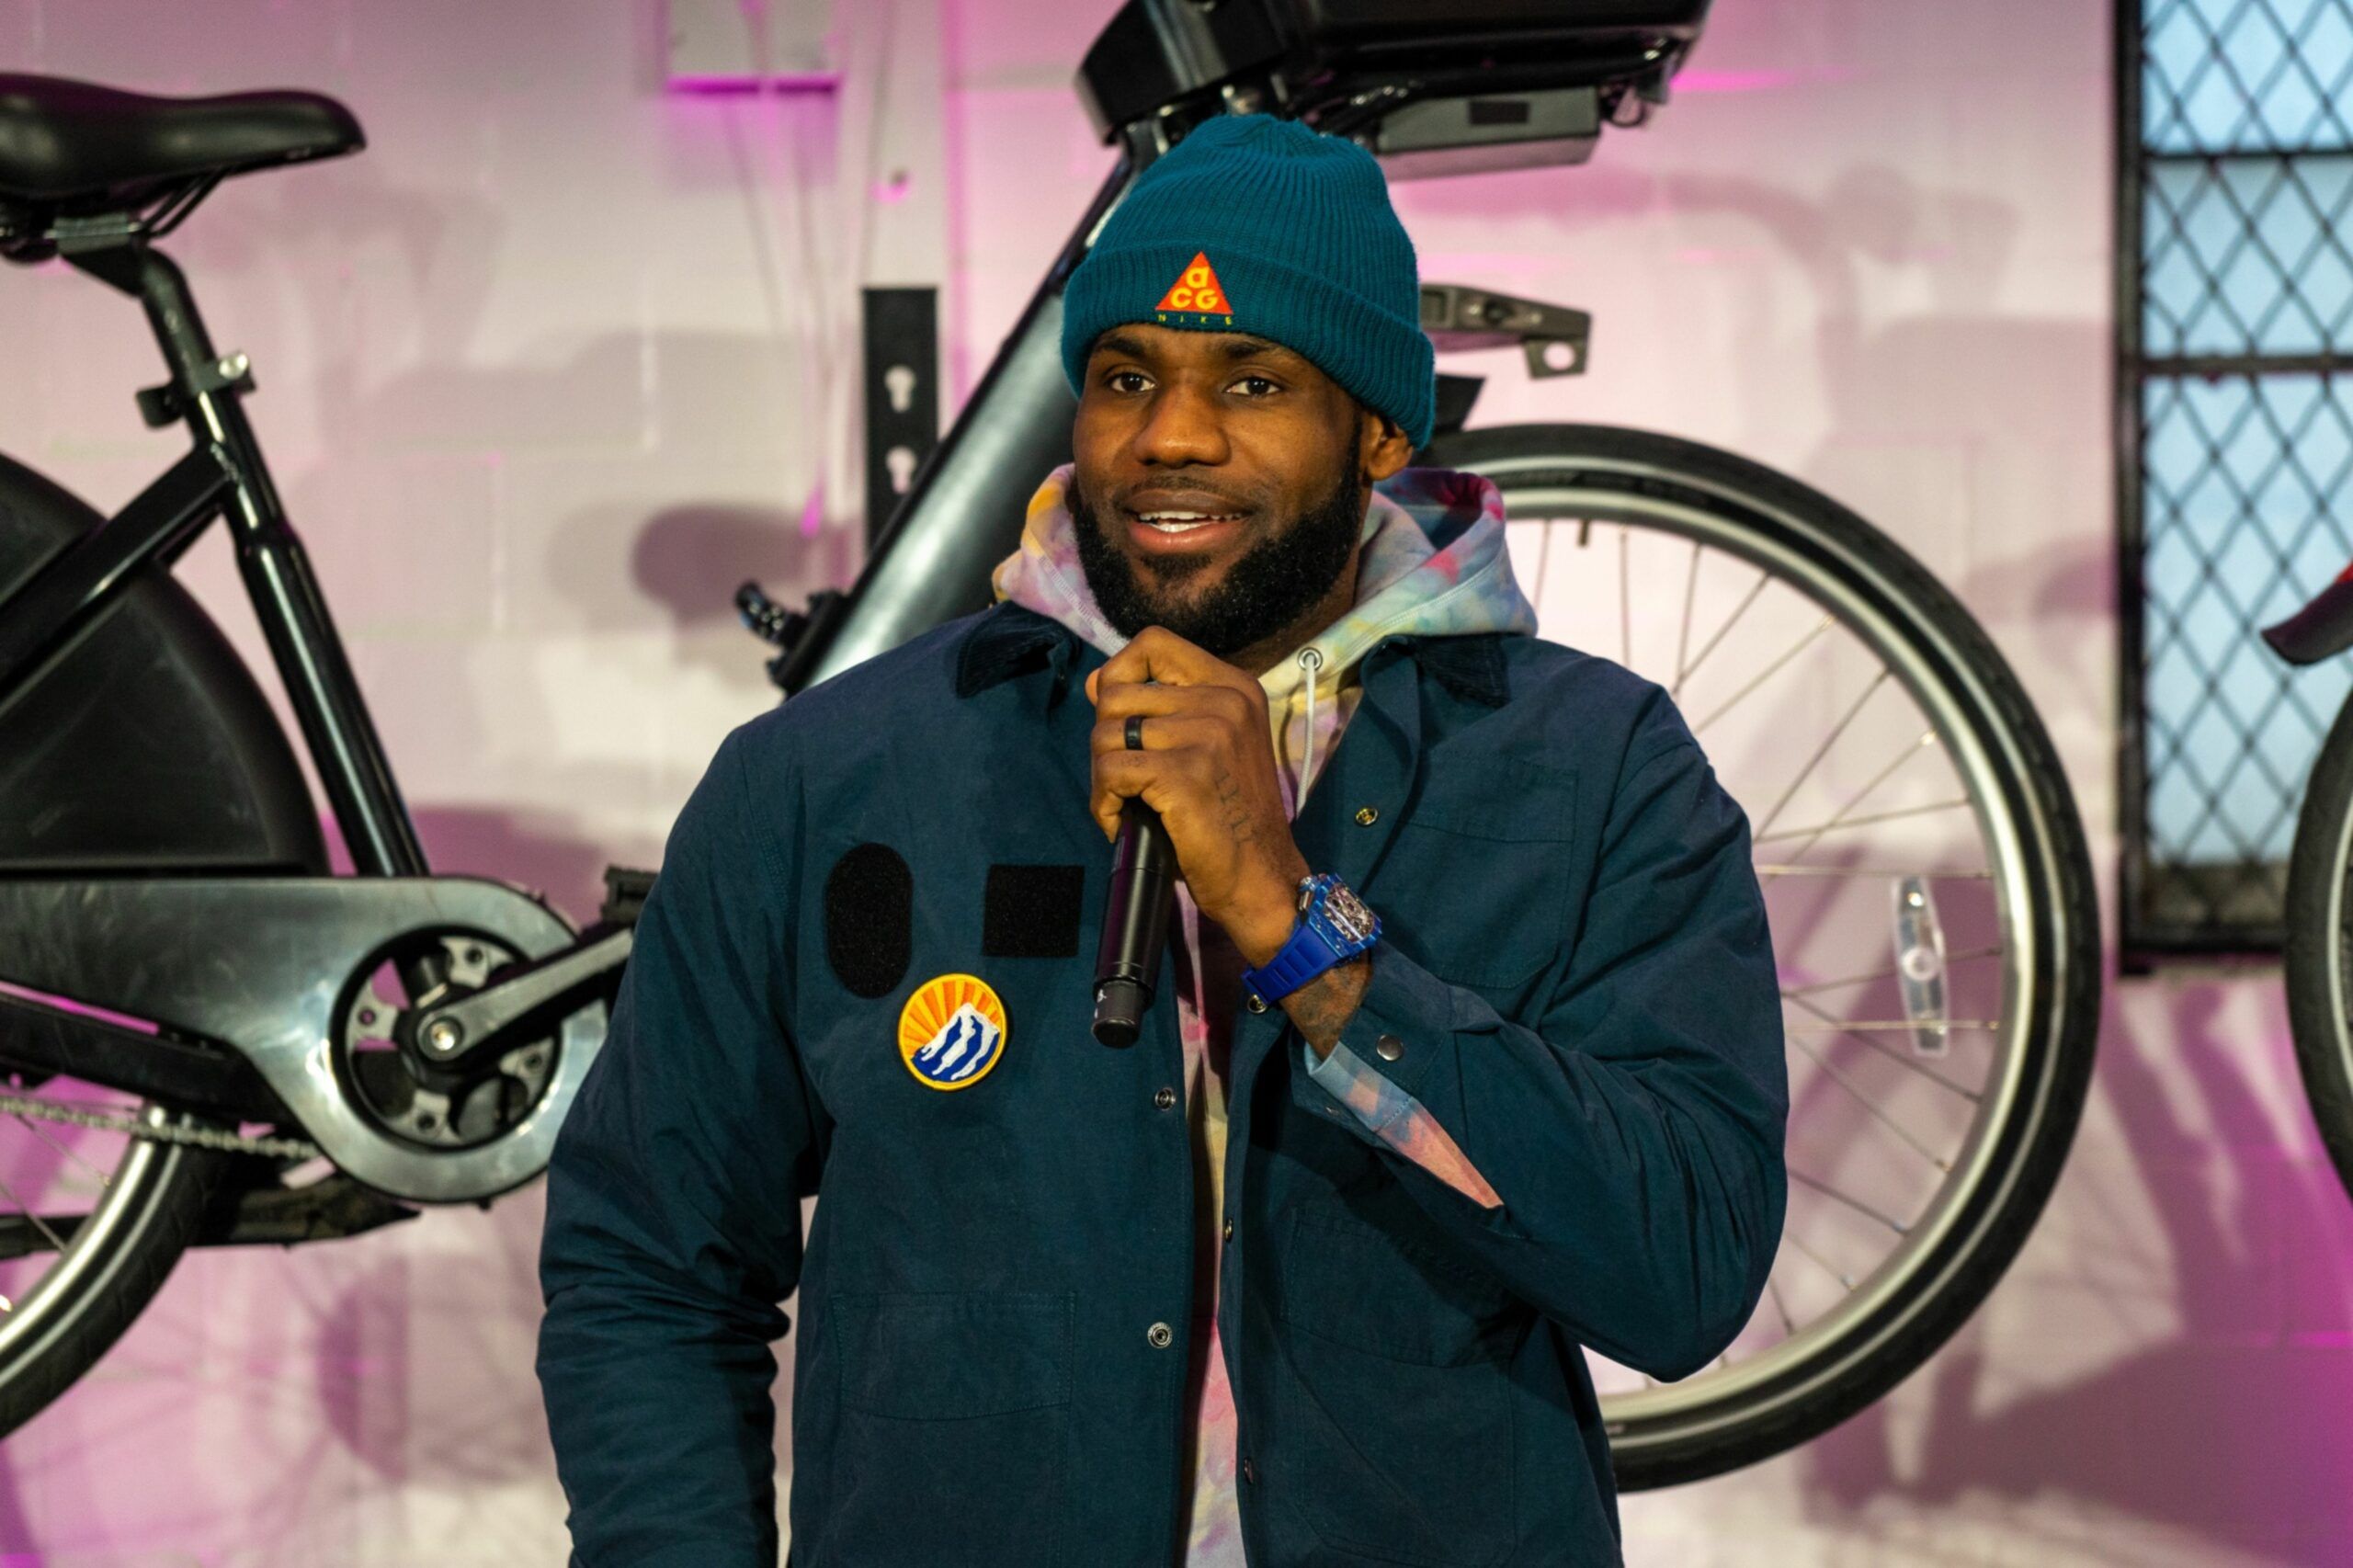 LeBron James, professional basketball player for the National Basketball Association (NBA) Los Angeles Lakers, speaks during a launch event for Lyftup in New York, U.S., on Tuesday, Jan. 21, 2020. Lyft Inc. has partnered with LeBron James and his athlete empowerment company, Uninterrupted, along with the YMCA, to expand bikeshare access by giving away thousands of free one year Lyft bikeshare memberships to young people across the country. Photographer: David 'Dee' Delgado/Bloomberg